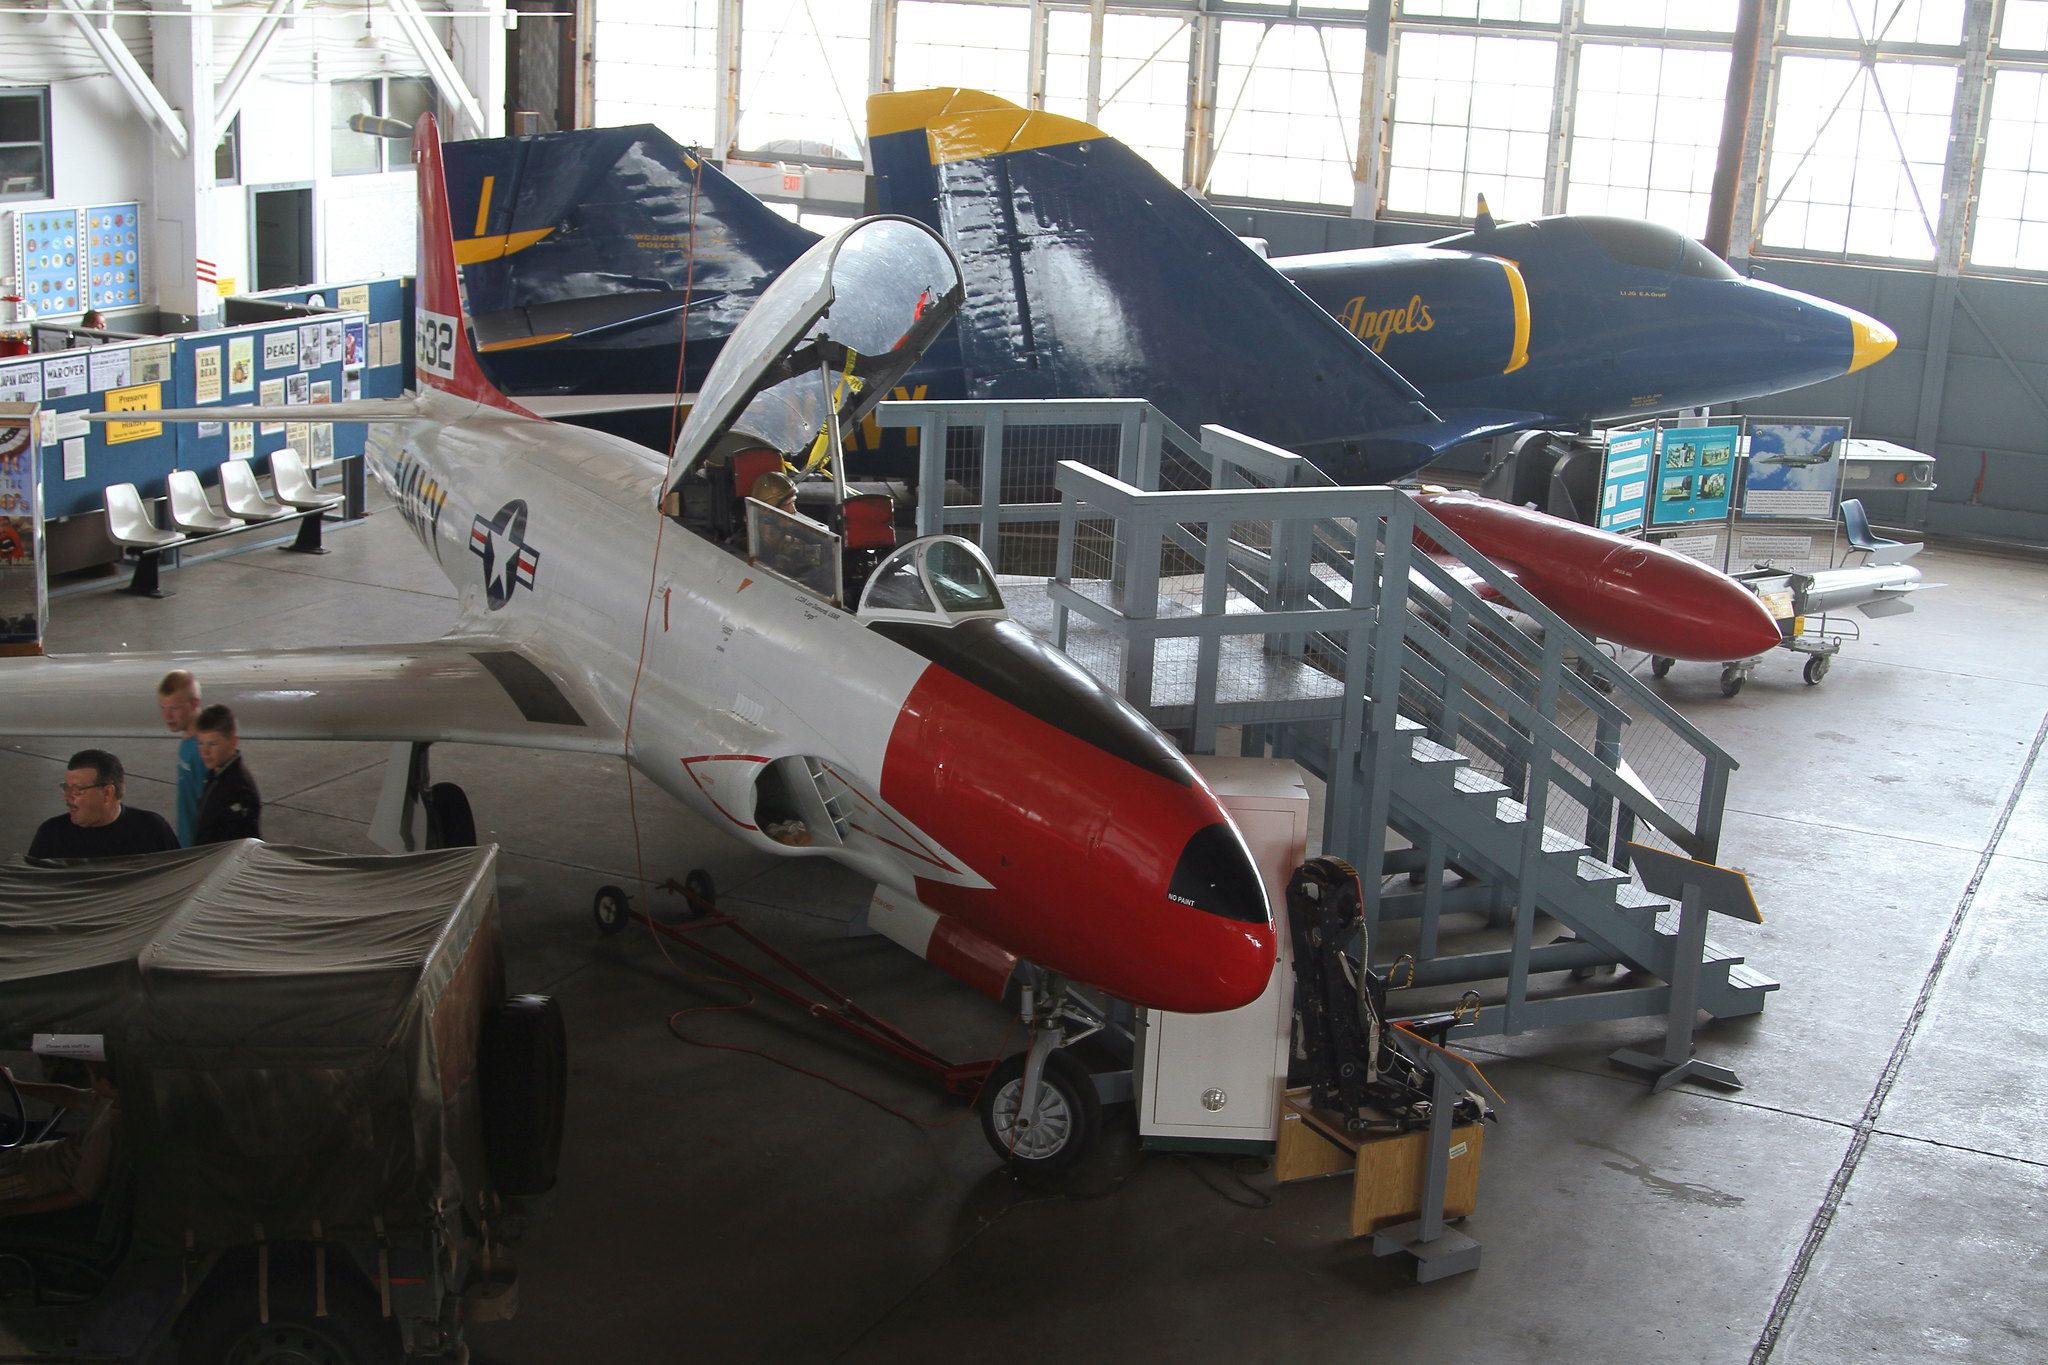 Aircraft on display at the Naval Air Station Wildwood Aviation Museum